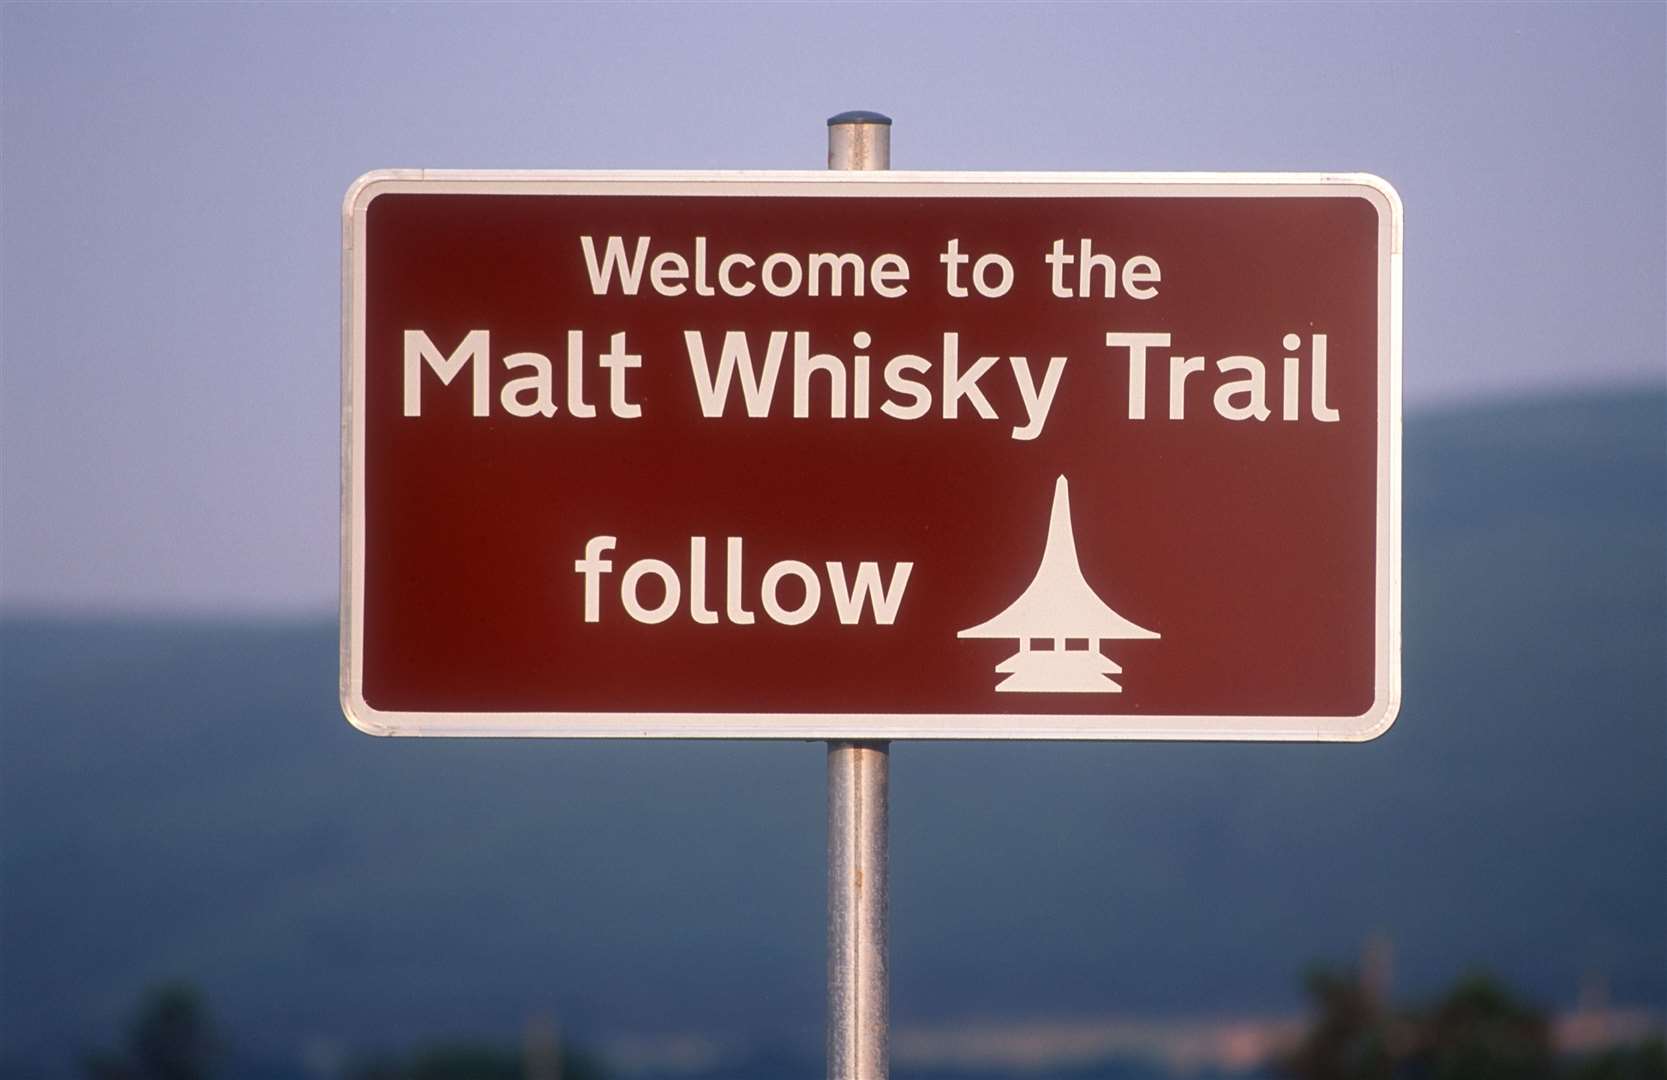 Other regions are now setting up their own whisky trails.